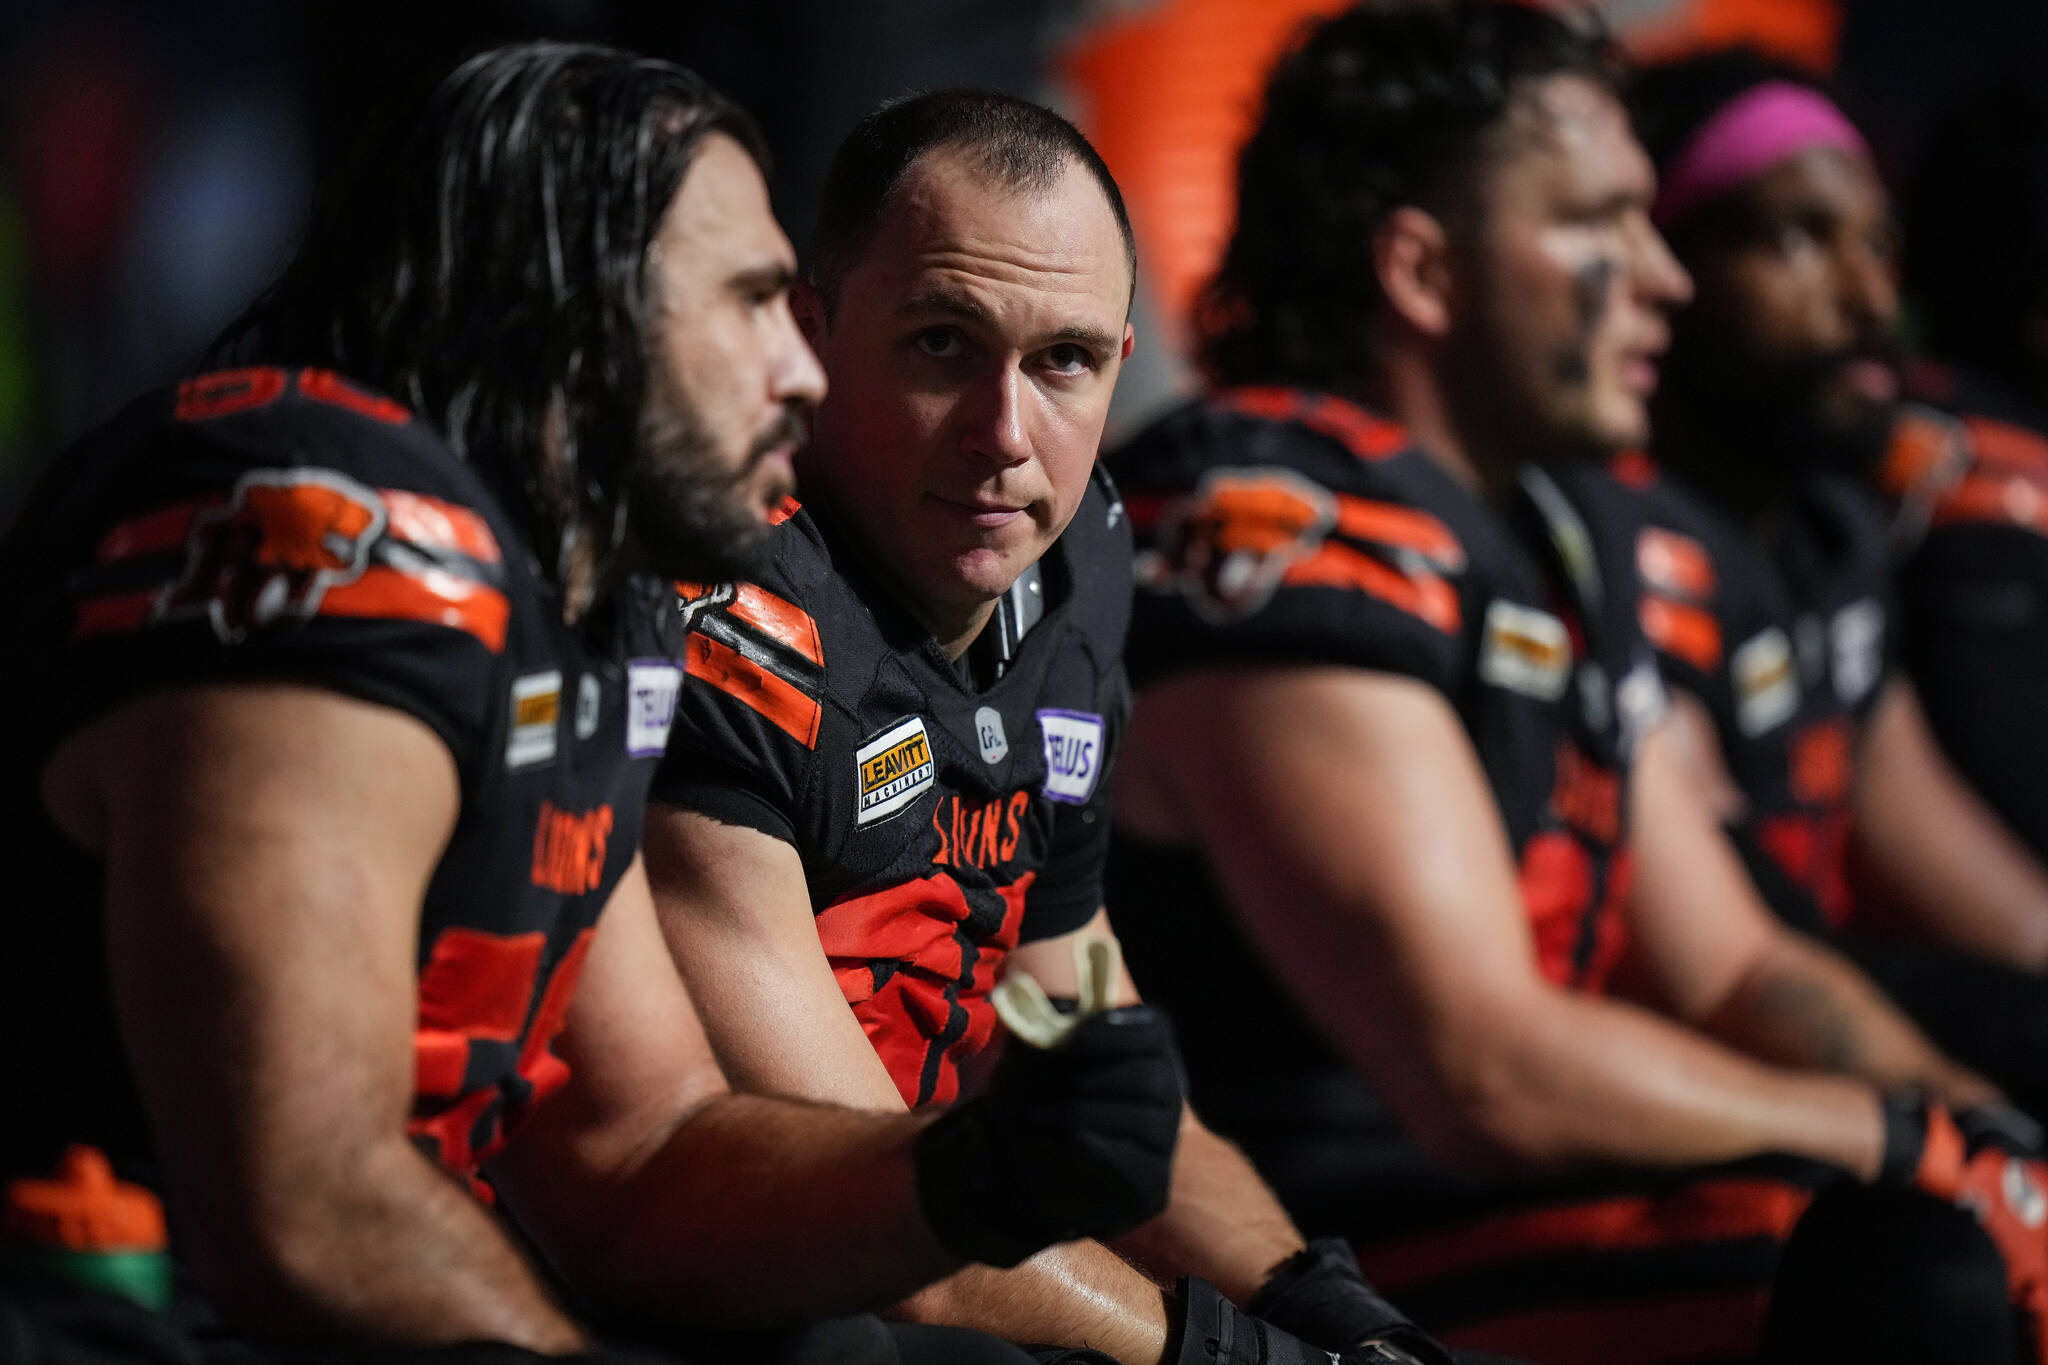 B.C. Lions defensive lineman Mathieu Betts, second left, talks with David Menard, left, as they sit on the bench after the third quarter of a CFL football game against the Calgary Stampeders, in Vancouver, on Friday, October 20, 2023. Betts recorded his 18th sack of the season to set a new single-season sack record by a Canadian. THE CANADIAN PRESS/Darryl Dyck